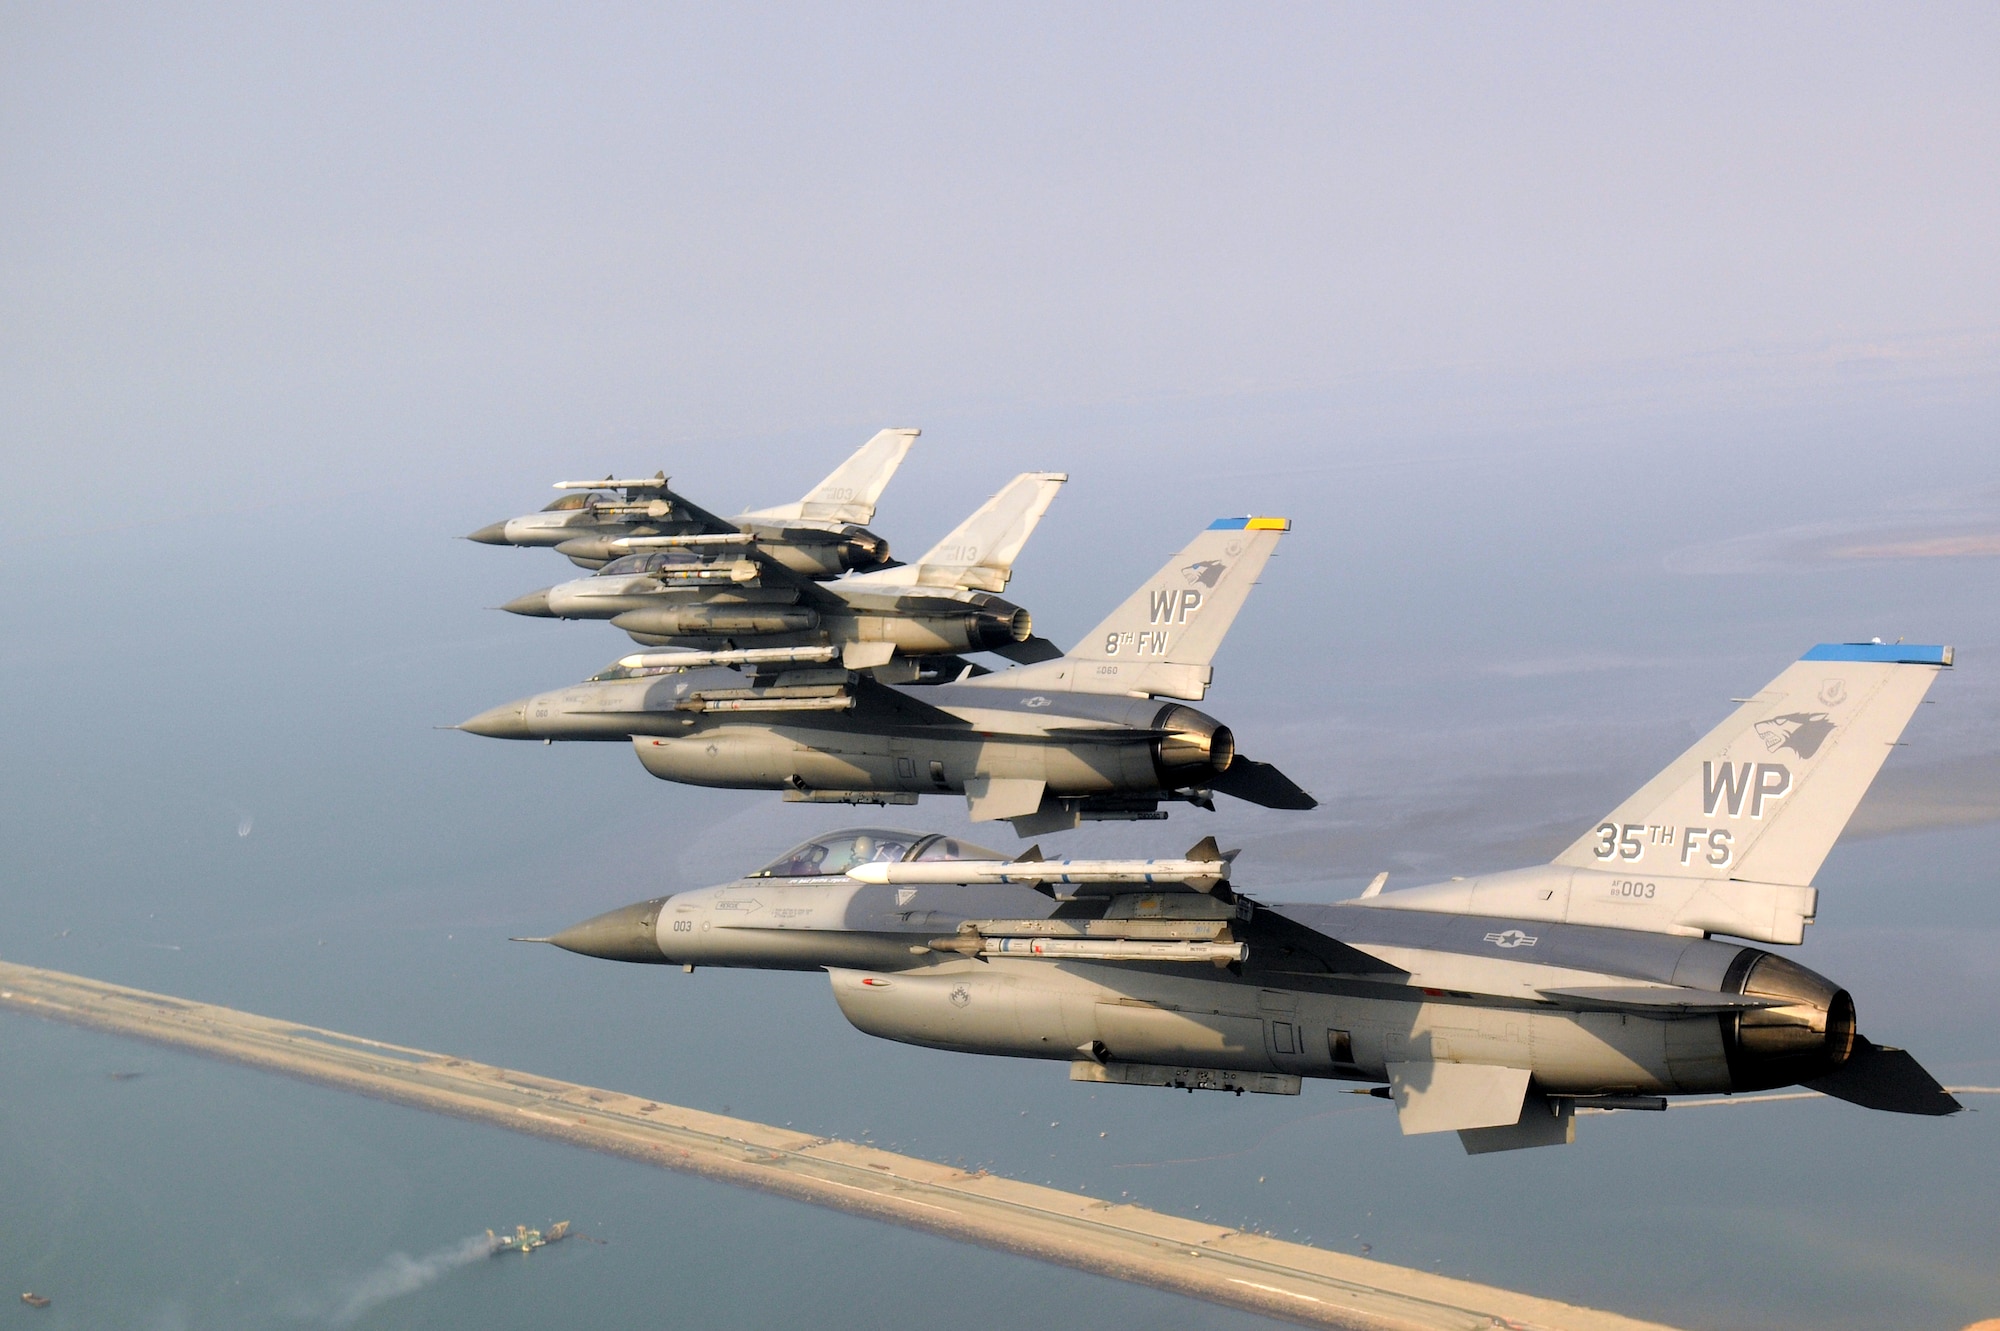 KUNSAN AIR BASE, Republic of Korea -- Four F-16 Fighting Falcons fly over the Saemangeum Seawall during a U.S. and Republic of Korea Air Force Coalition flight Nov. 10 in celebration of the 60th anniversary of the Korean War. (U.S. Air Force photo/Master Sgt. Jason Wilkerson)